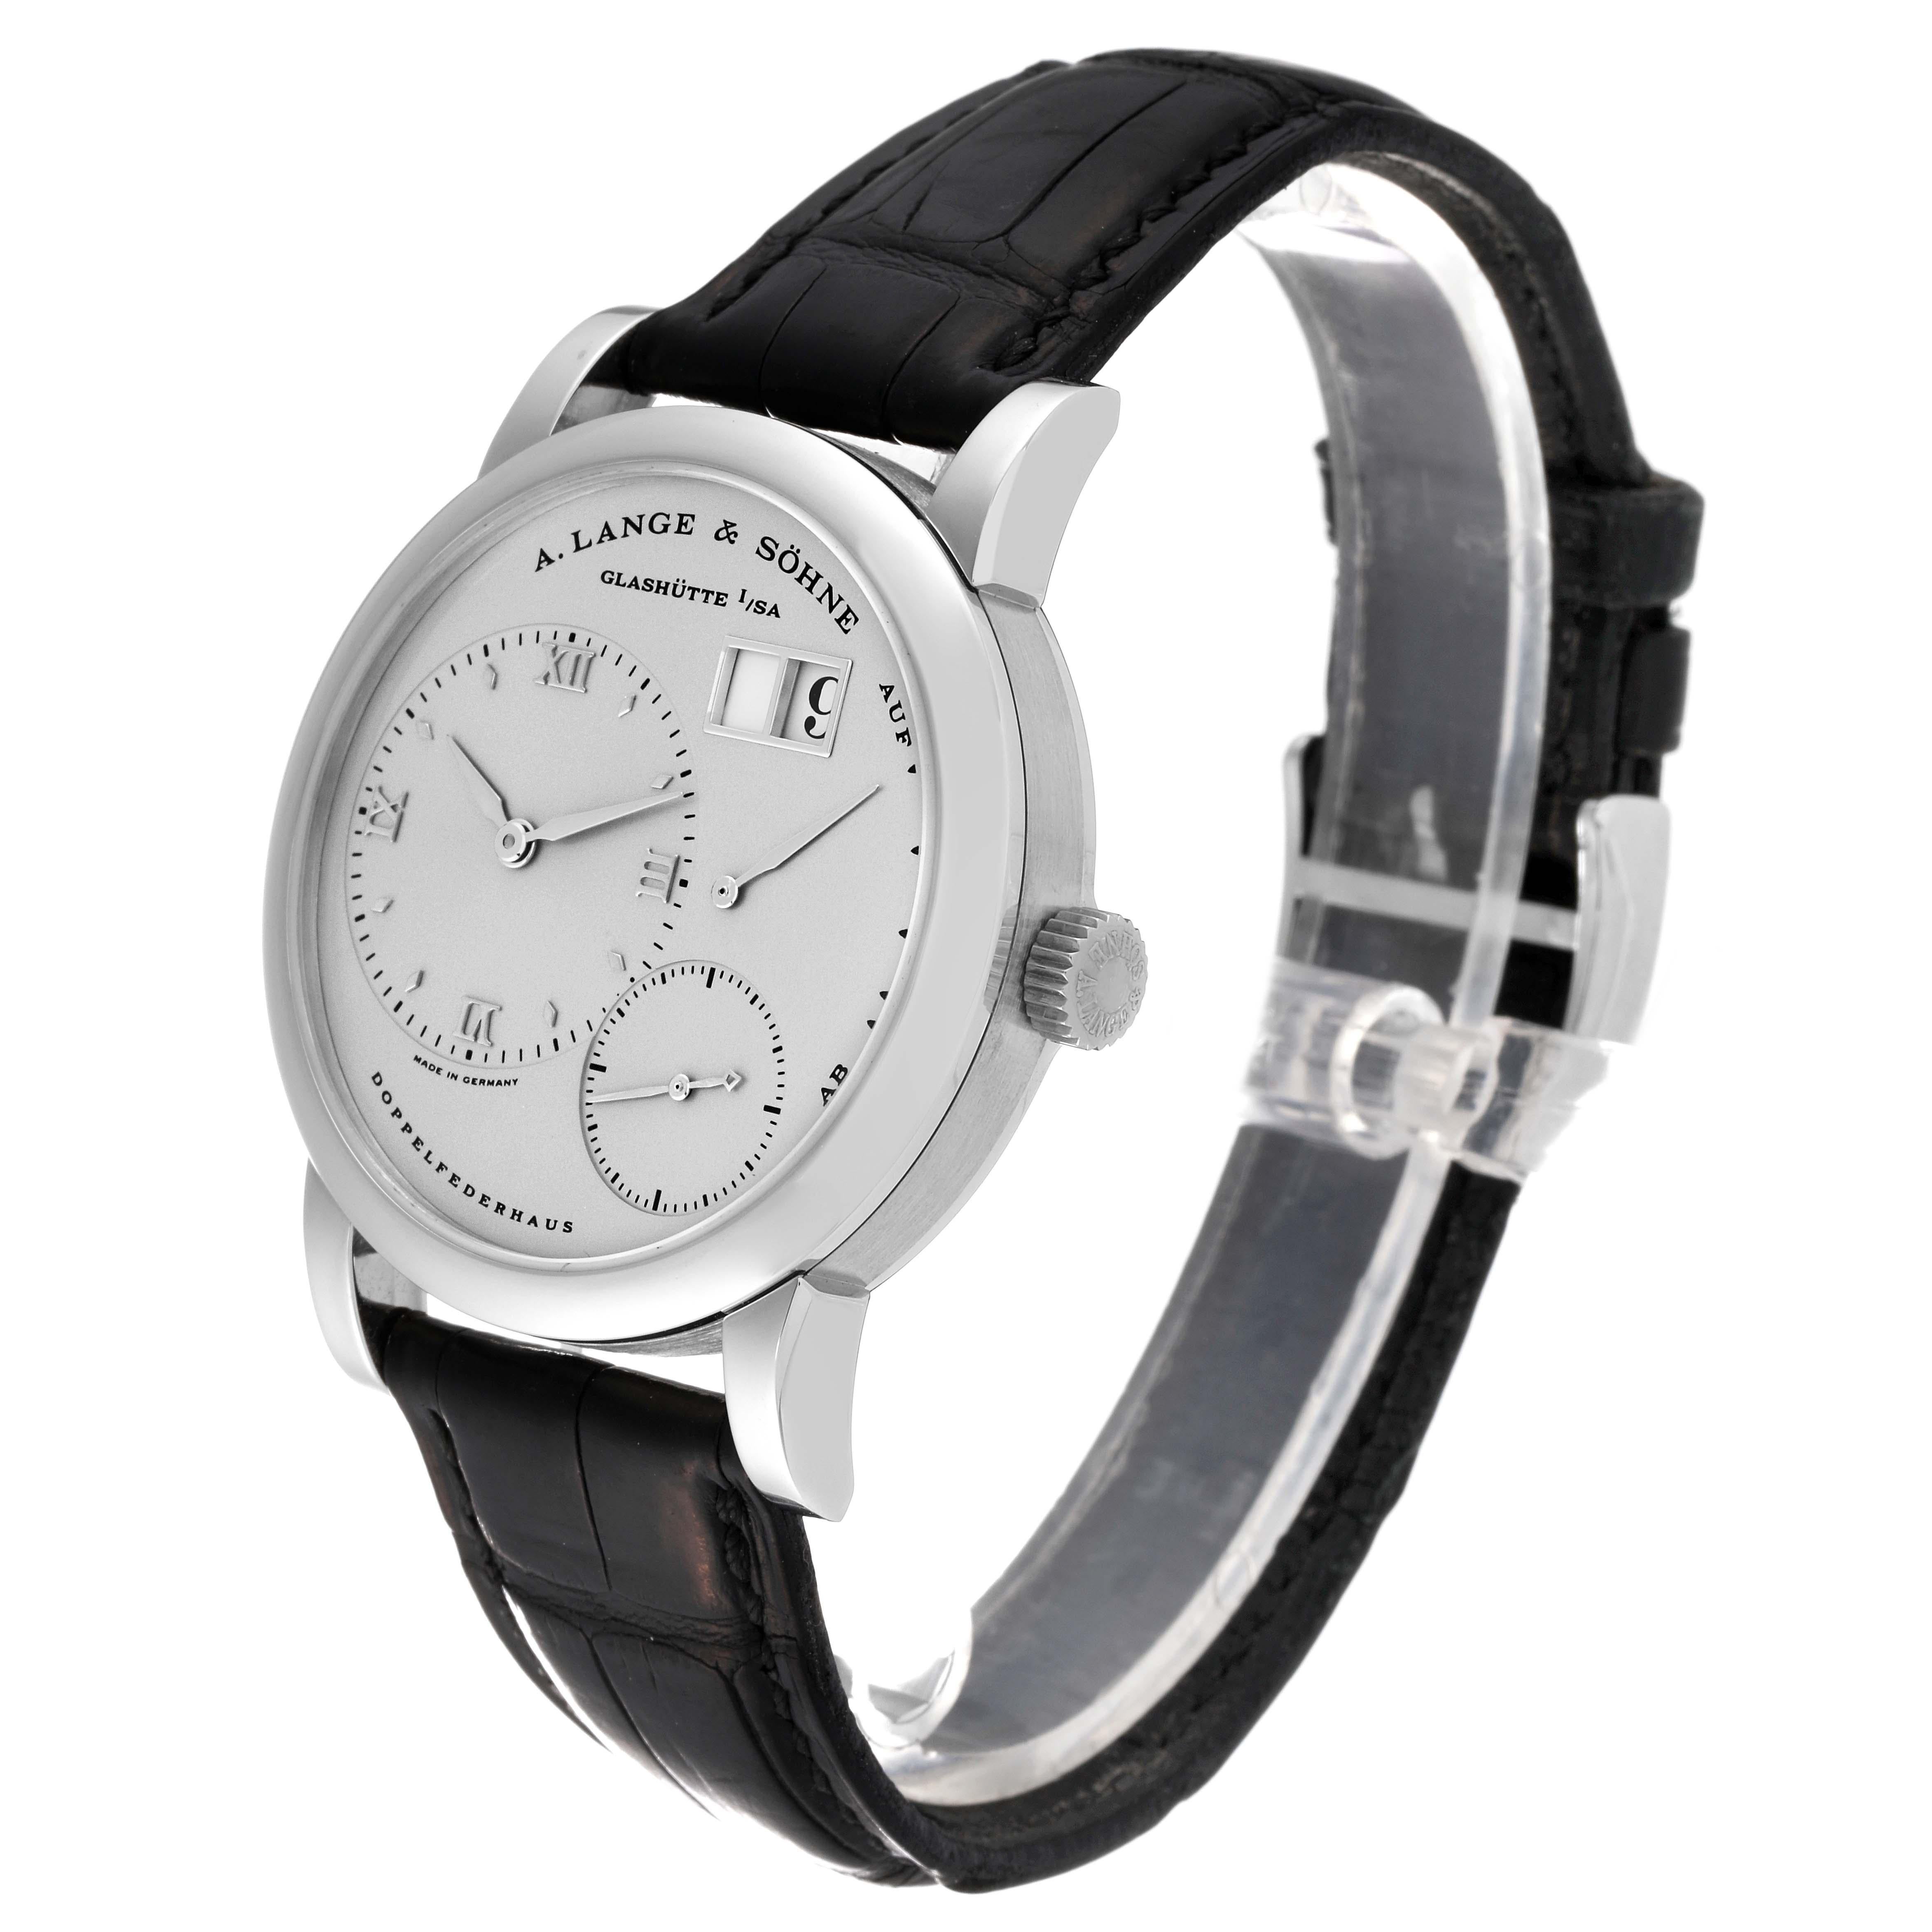 A. Lange and Sohne Lange 1 Silver Dial Platinum Mens Watch 101.025 For Sale 2